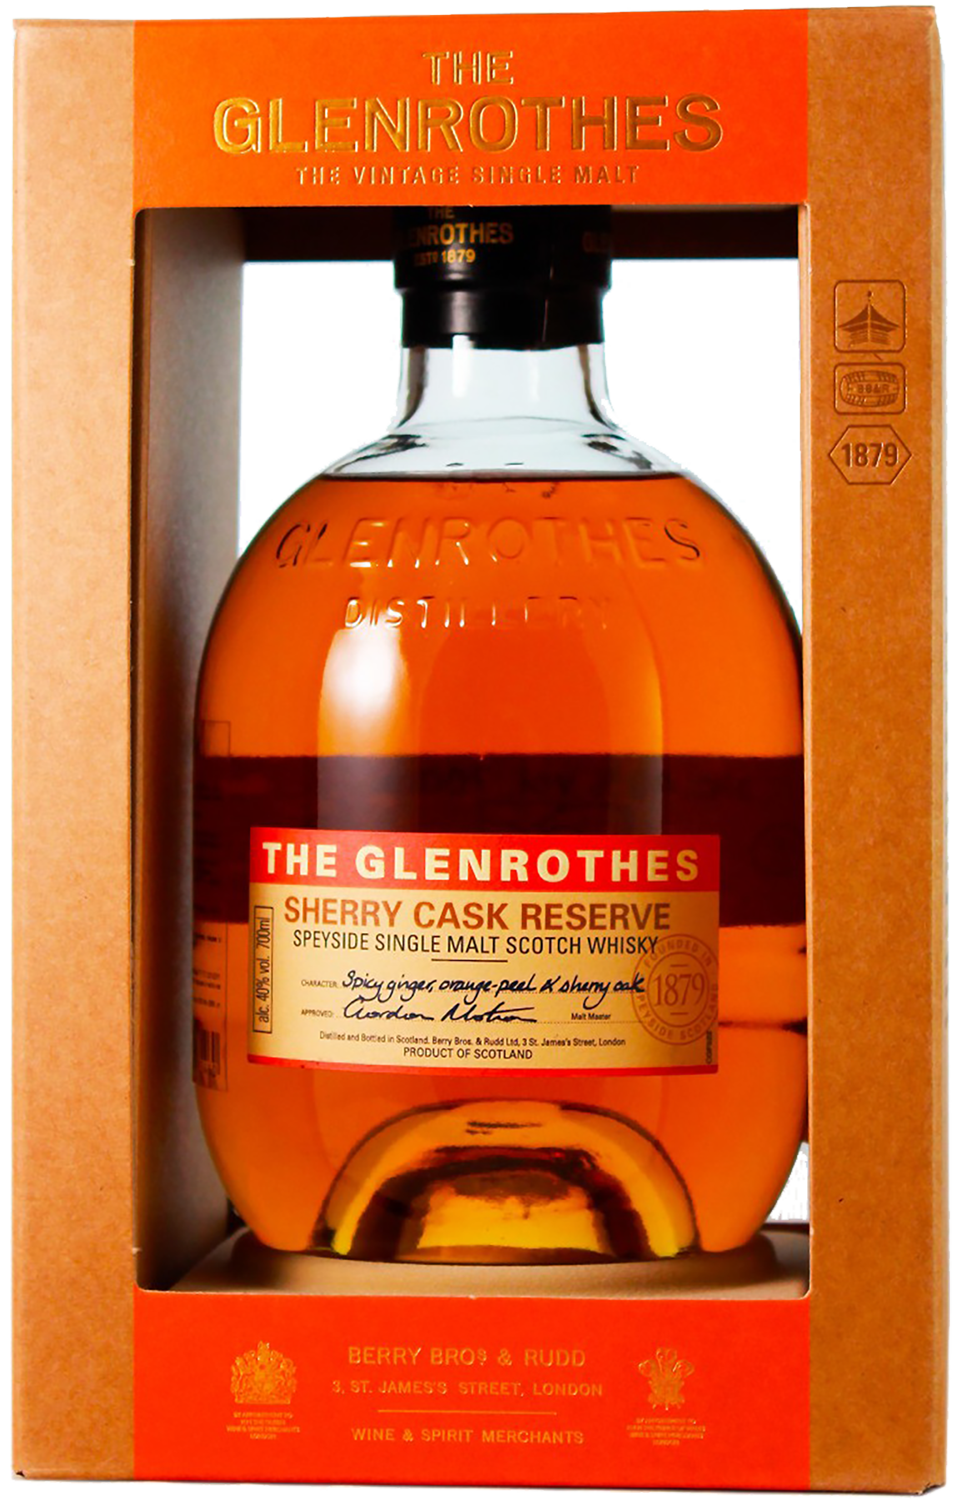 The Glenrothes Sherry Cask Reserve Speyside Single Malt Scotch Whisky(gift box) game of thrones house tyrell clynelish reserve single malt scotch whisky gift box